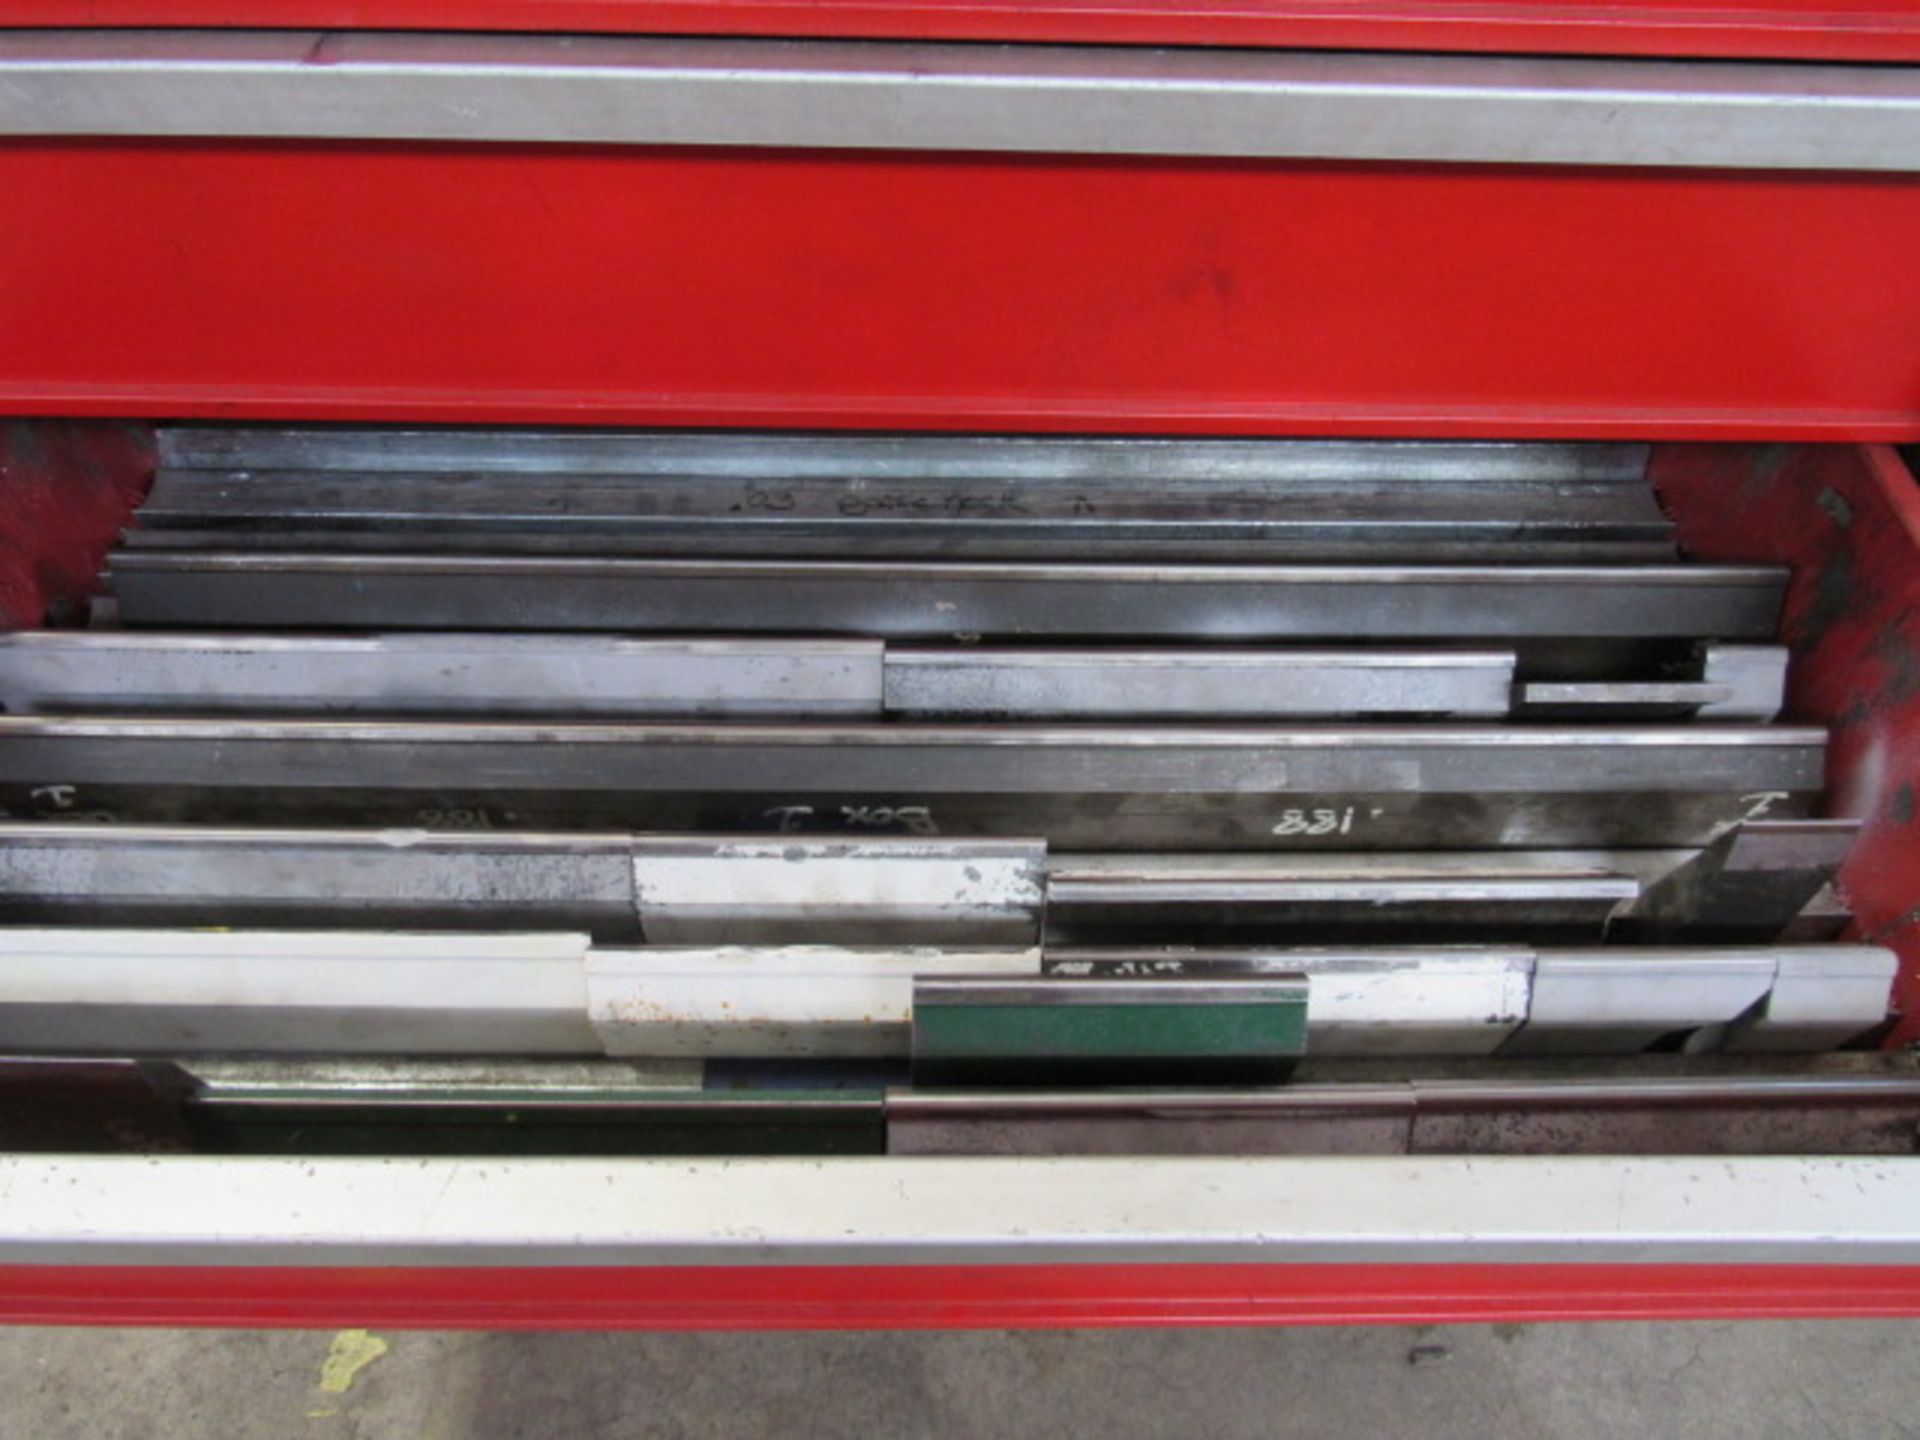 Amada 5 Drawer Portable Cabinet with Press Brake Dies - Image 3 of 6